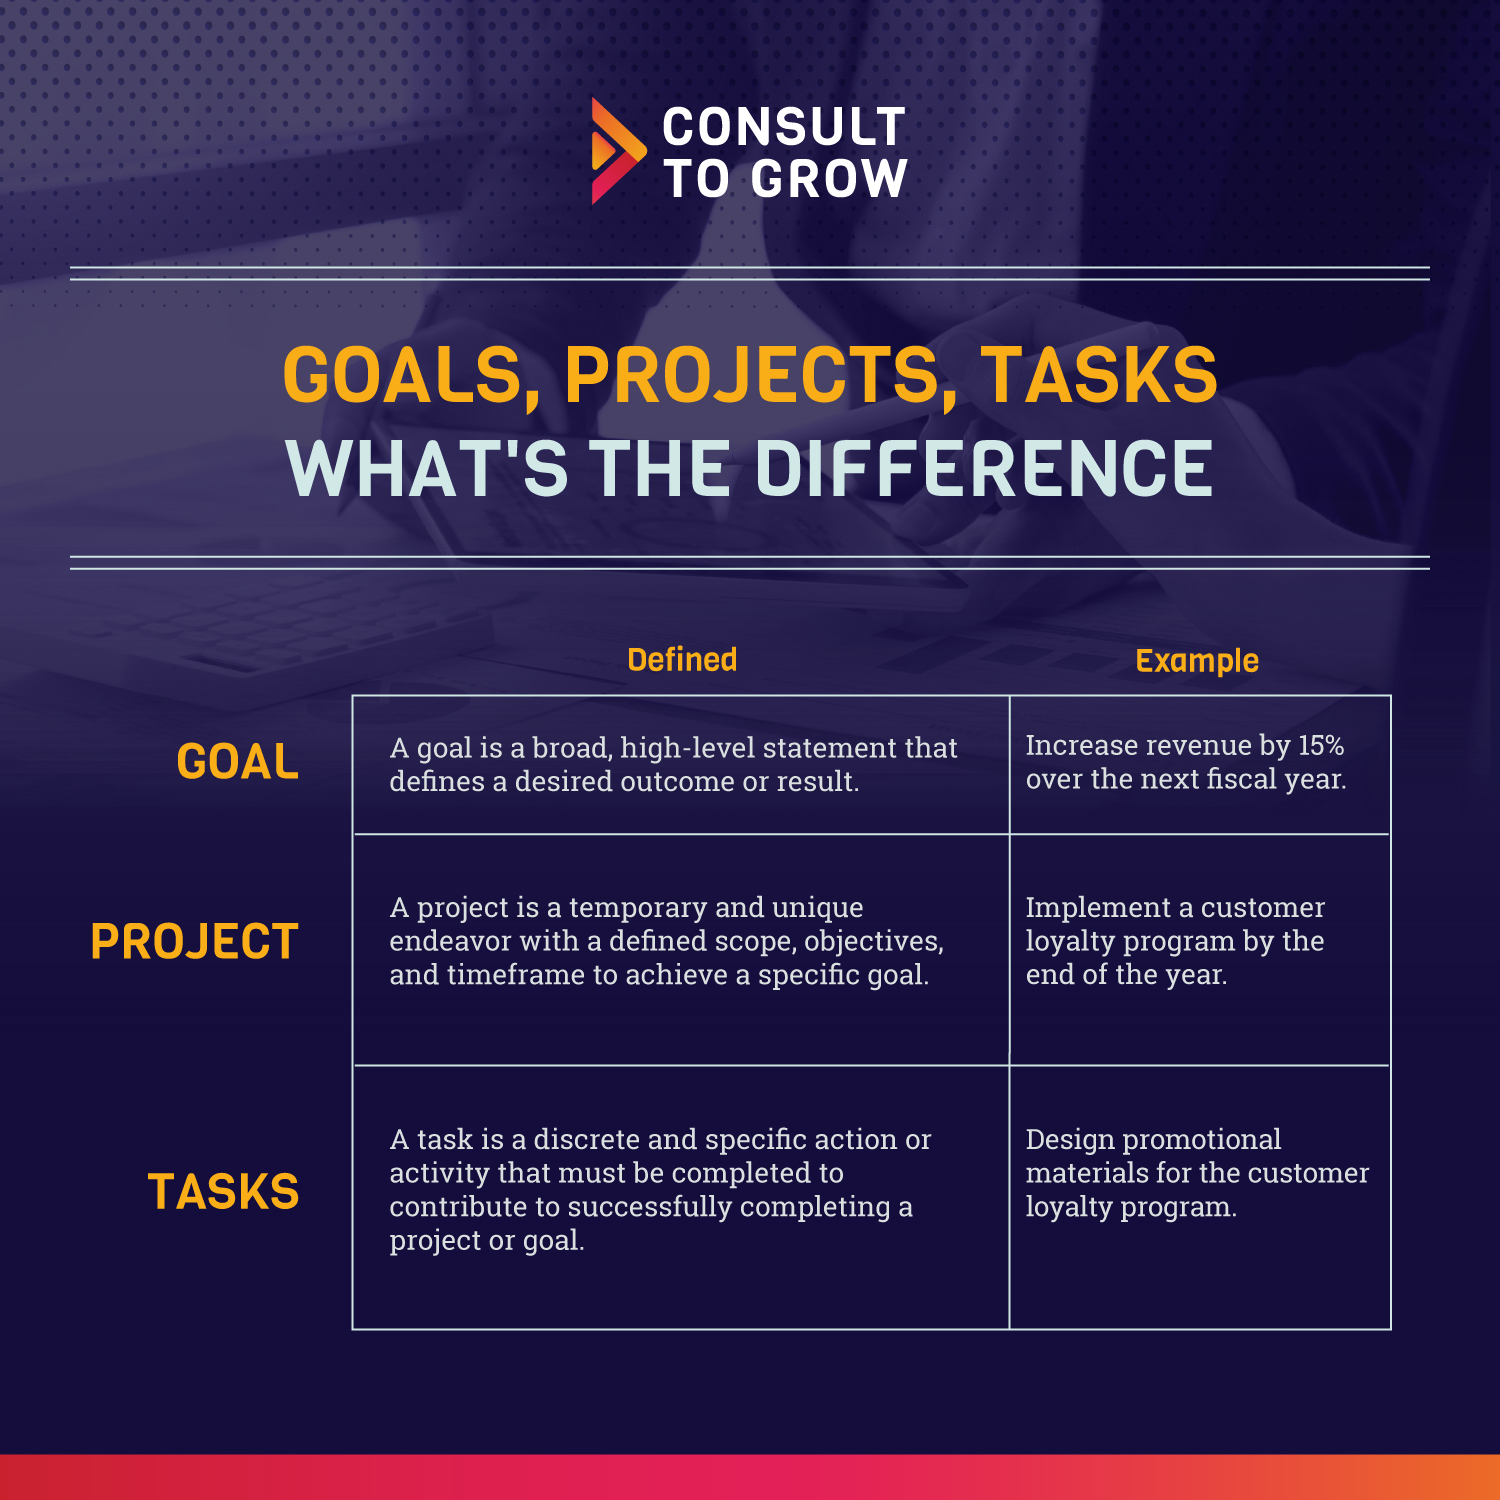 Goals, Projects, Tasks: What's the Difference?